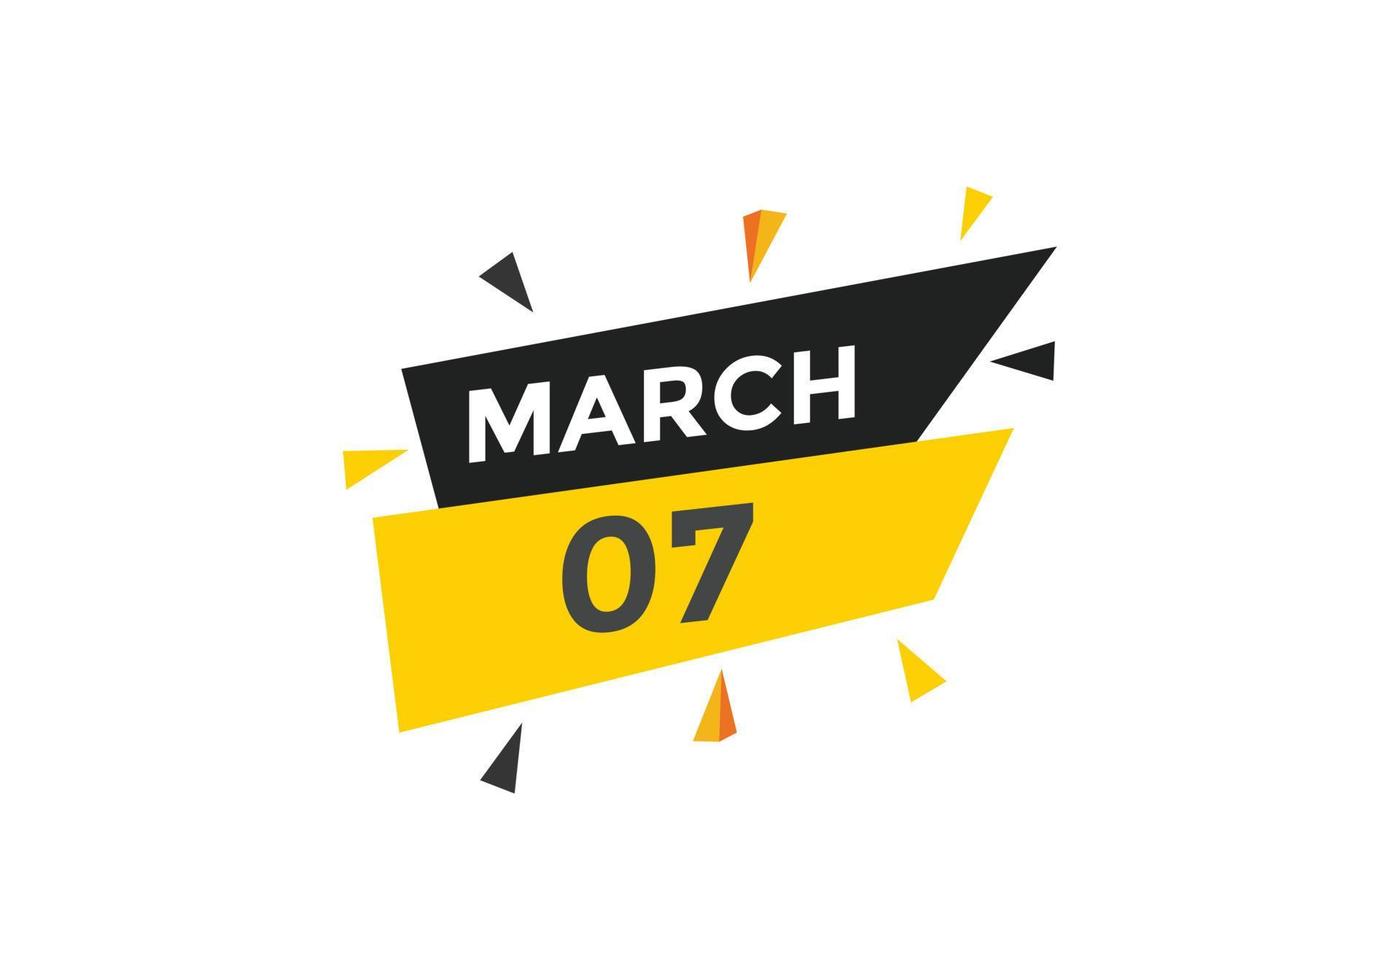 march 7 calendar reminder. 7th march daily calendar icon template. Calendar 7th march icon Design template. Vector illustration